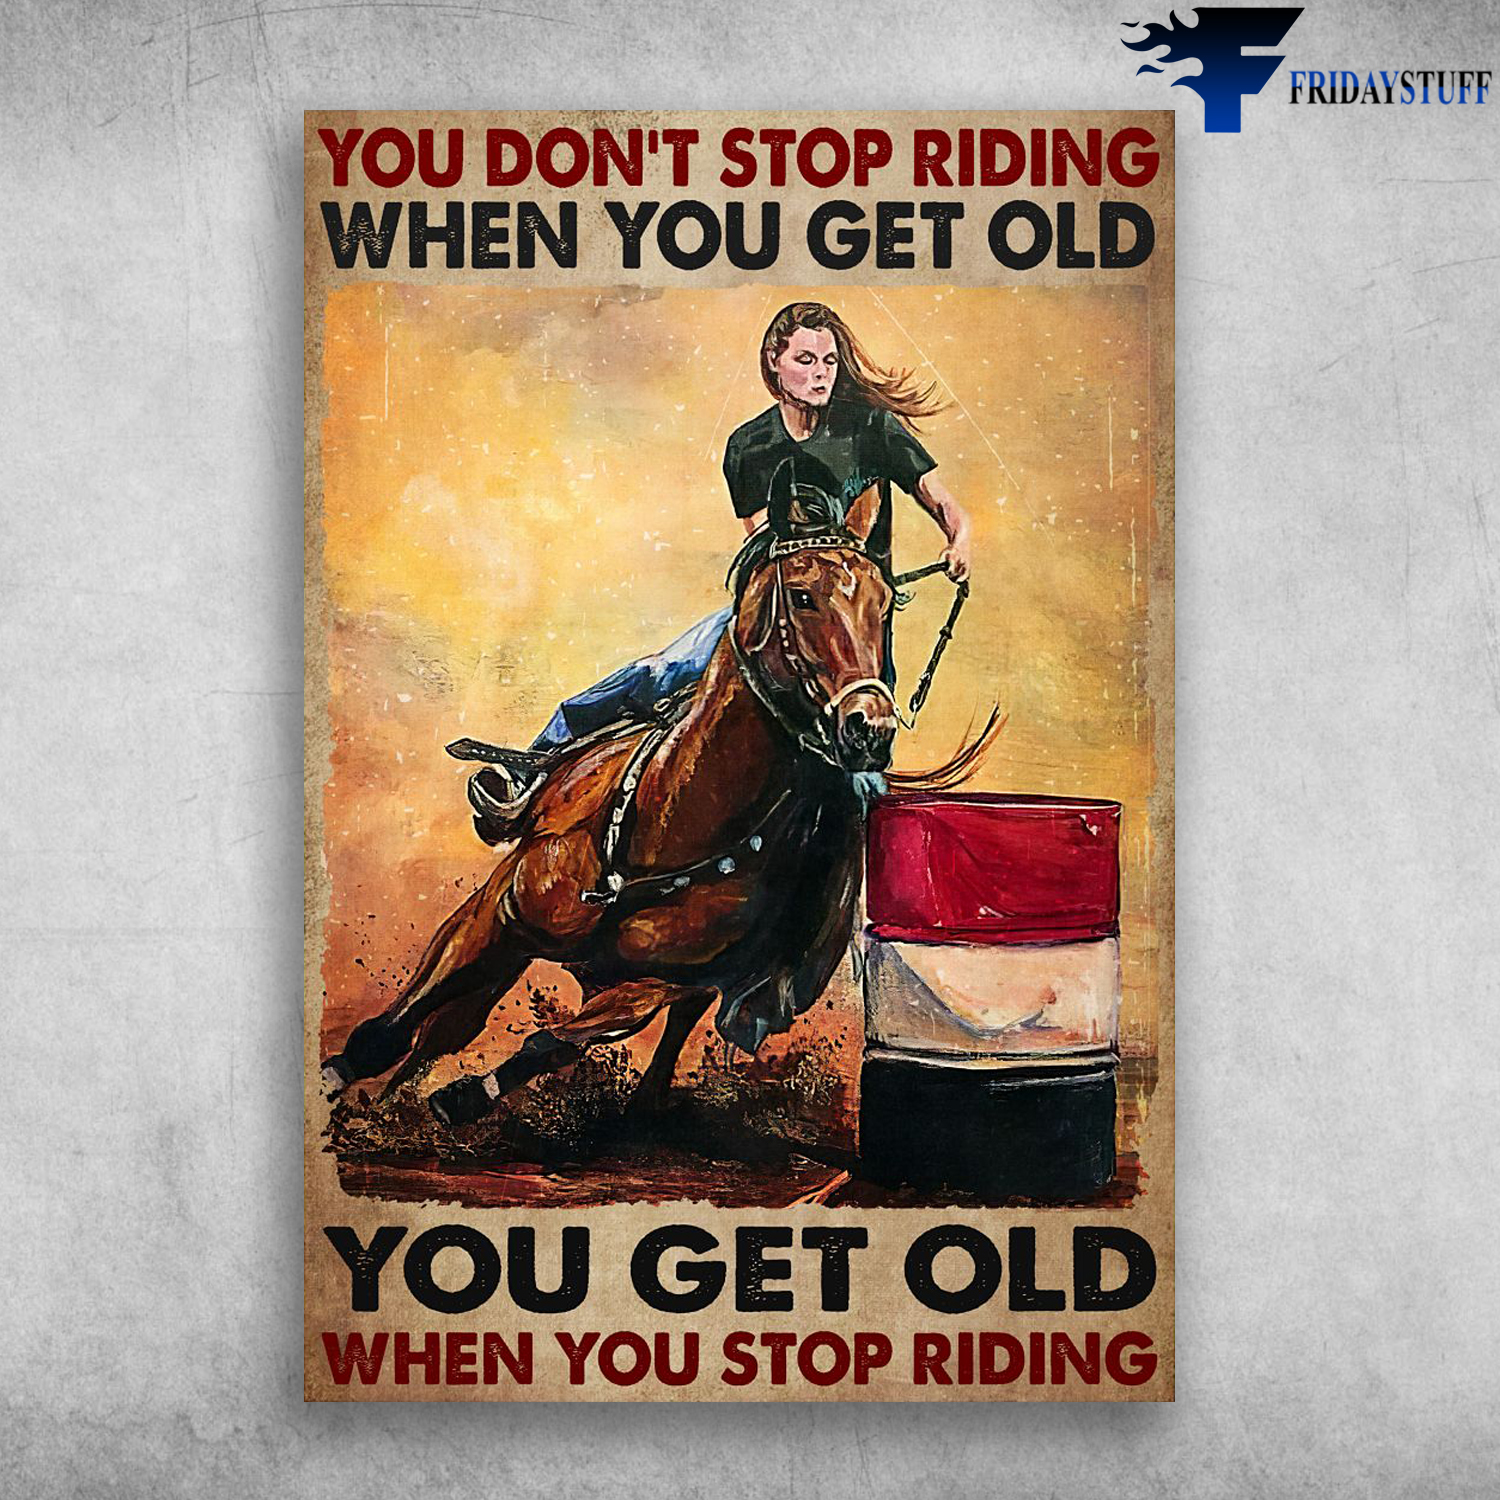 Lady Riding Horse - You Don't Stop Riding When You Get Old, You Get Old When You Stop Riding, Yemen Flag